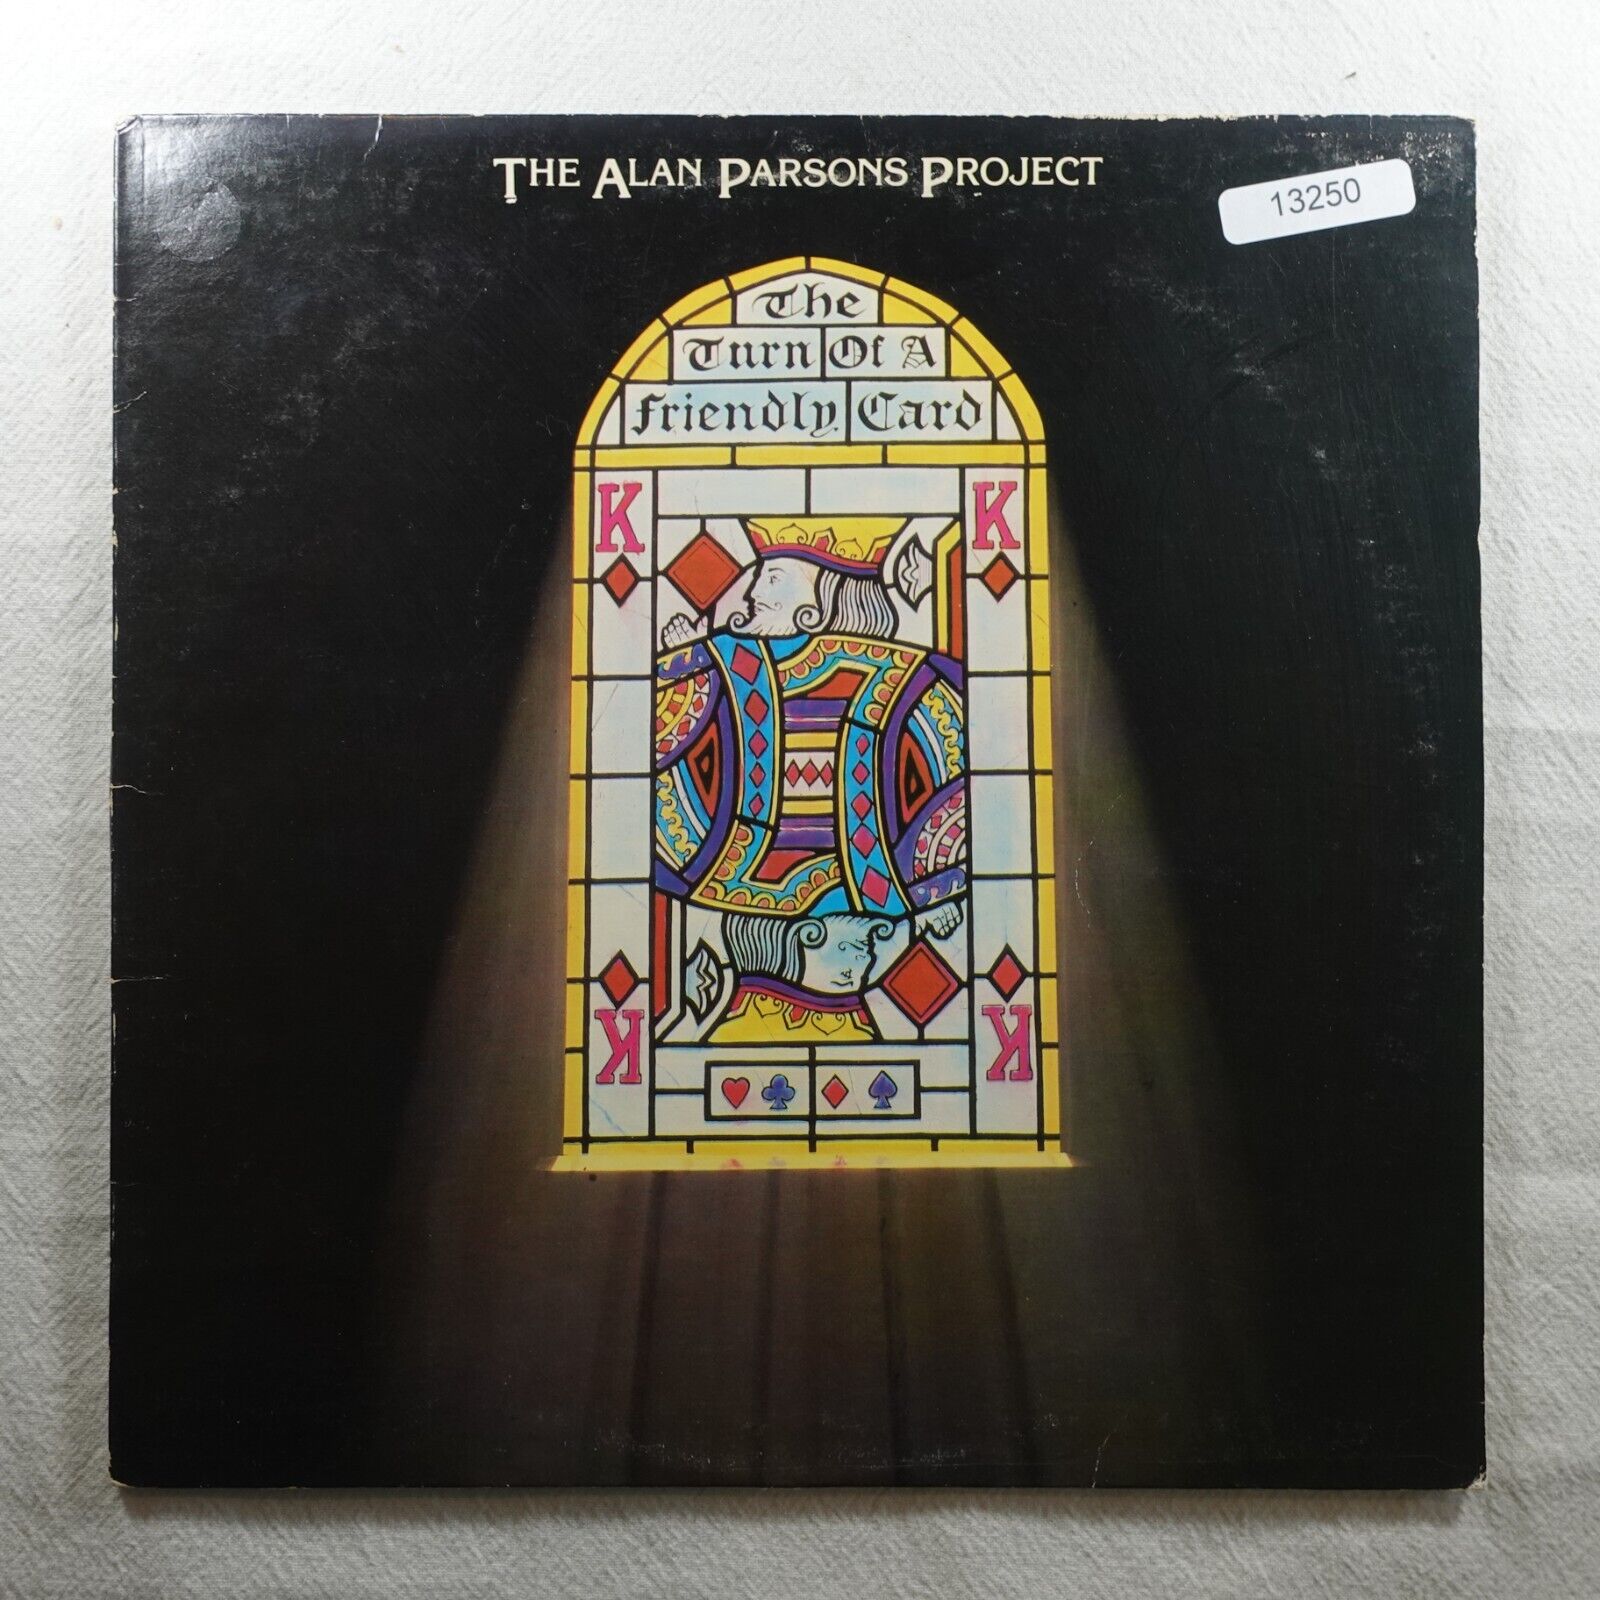 The Alan Parsons Project The Turn Of A  Friendly Card Arista  Record Album Vinyl